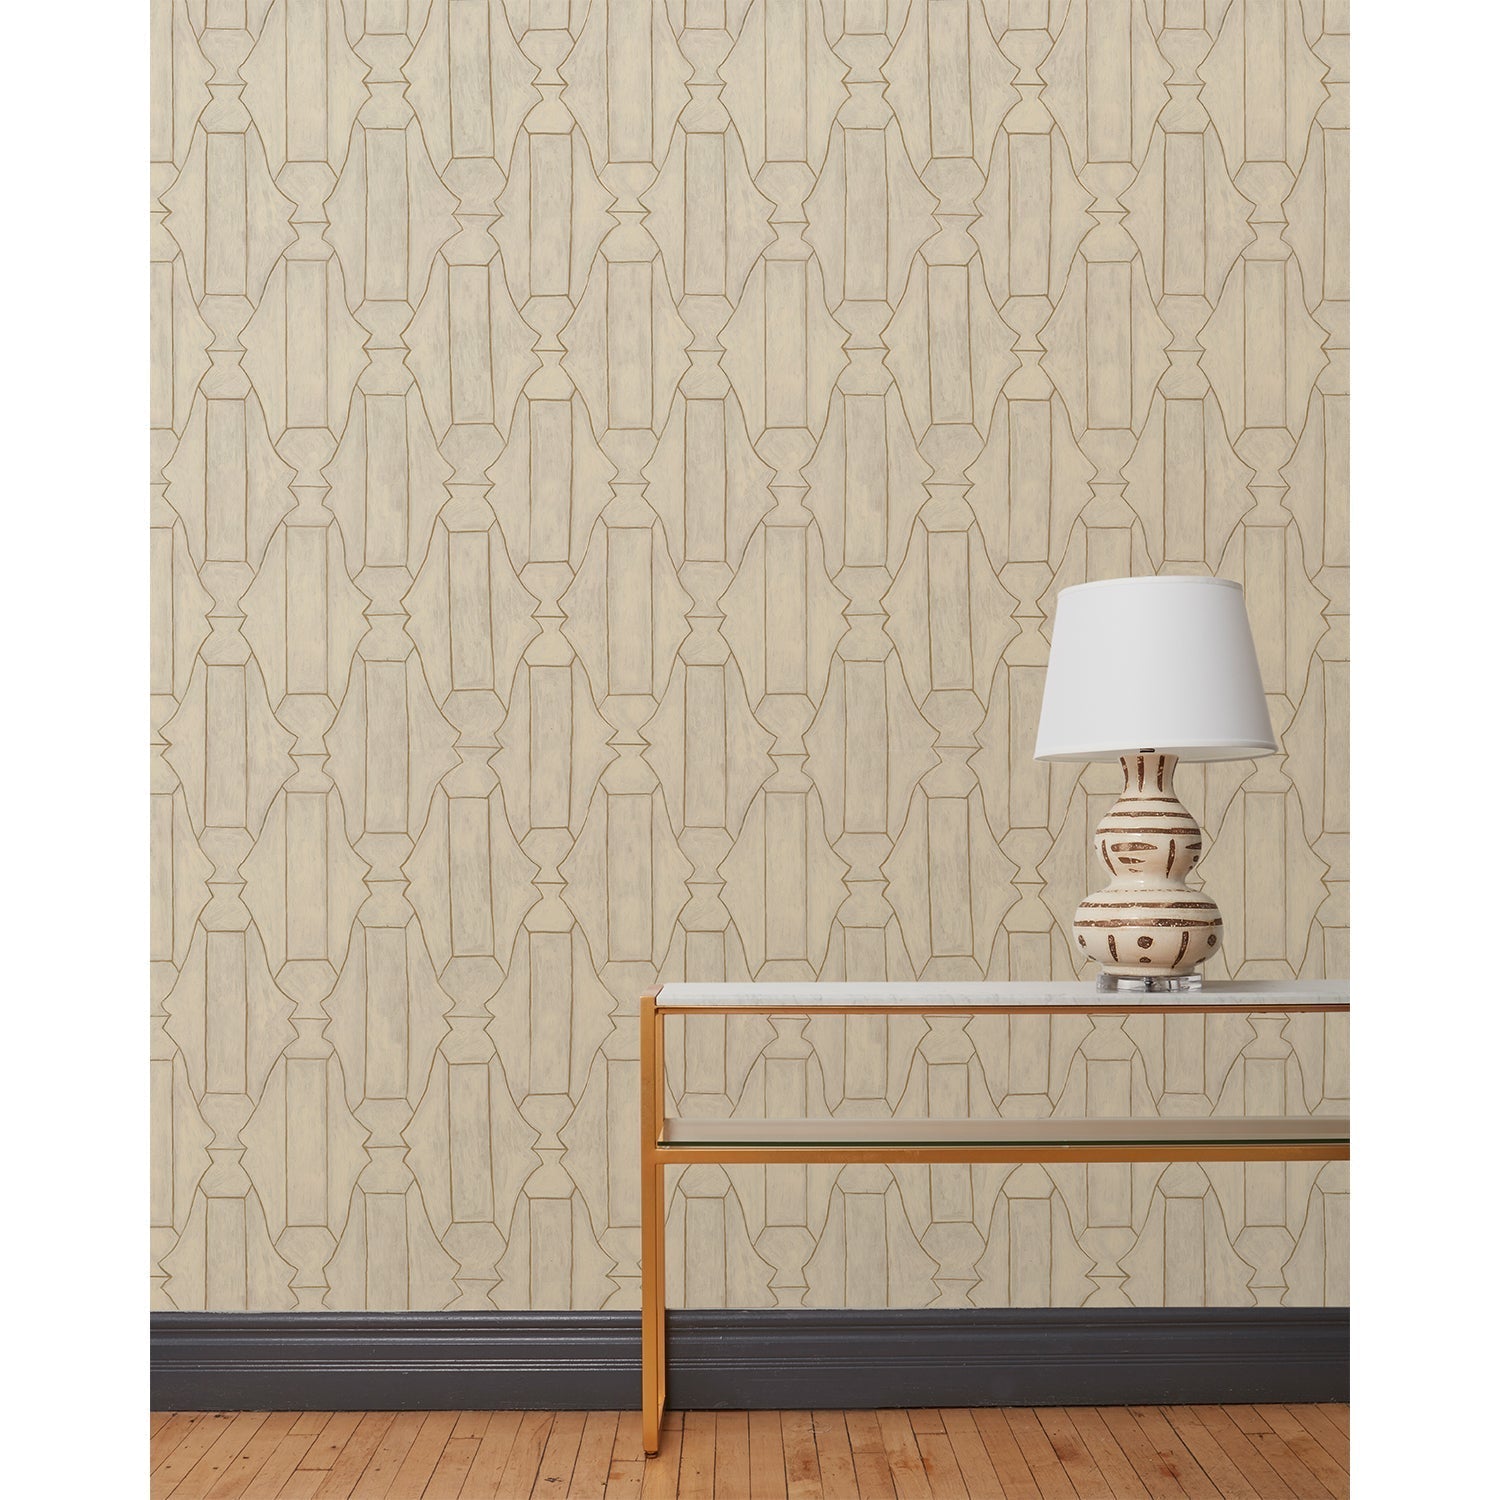 End table and white lamp in front of a wall papered in a repeating curvolinear print in gold on a painted cream field.